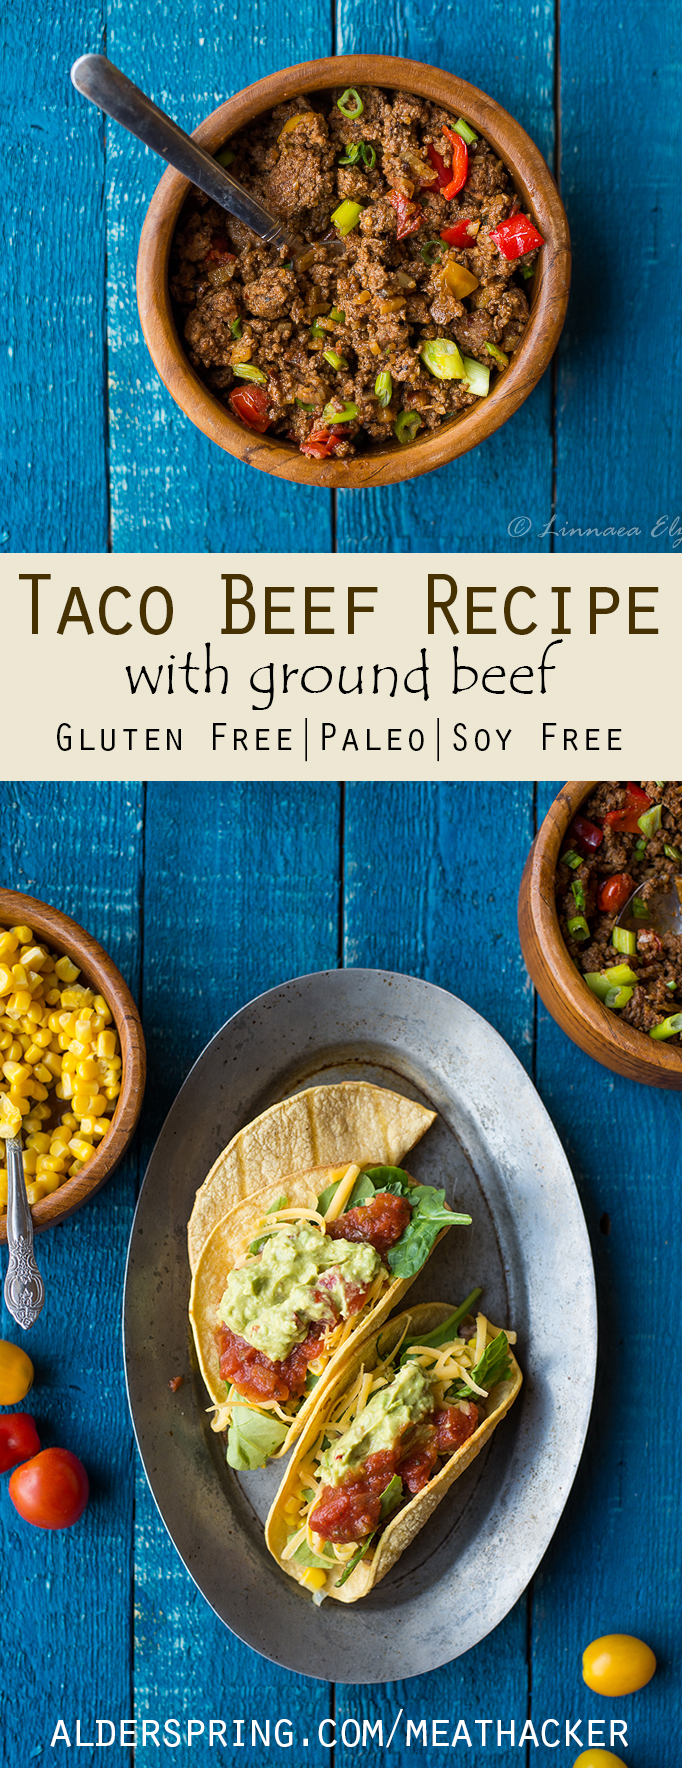 Easy taco beef recipe made with ground beef. Perfect for your next taco night!